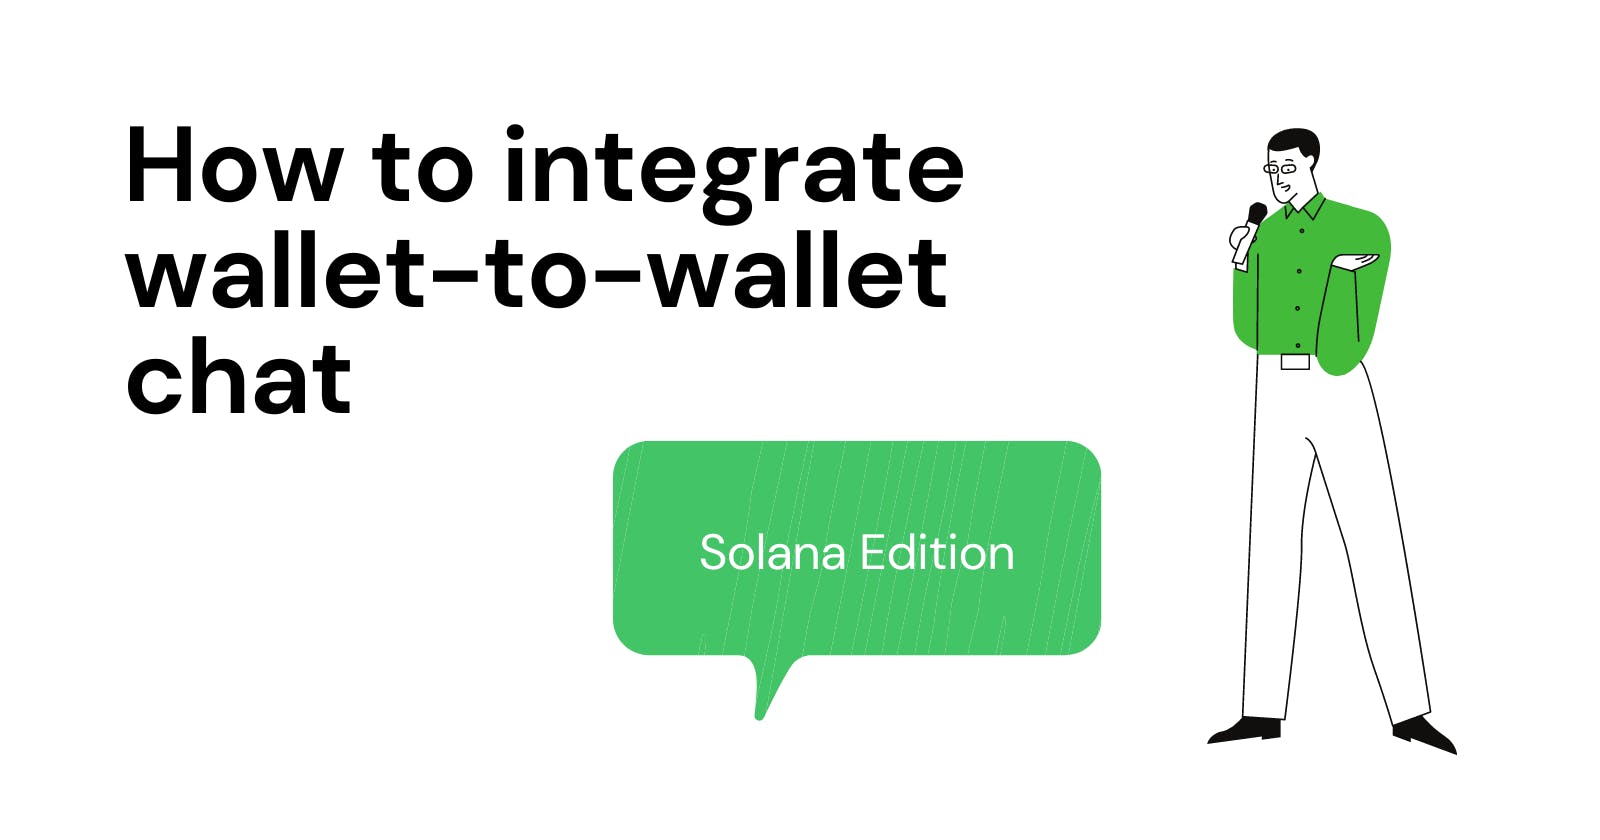 How to integrate wallet-to-wallet chat (Solana Edition)